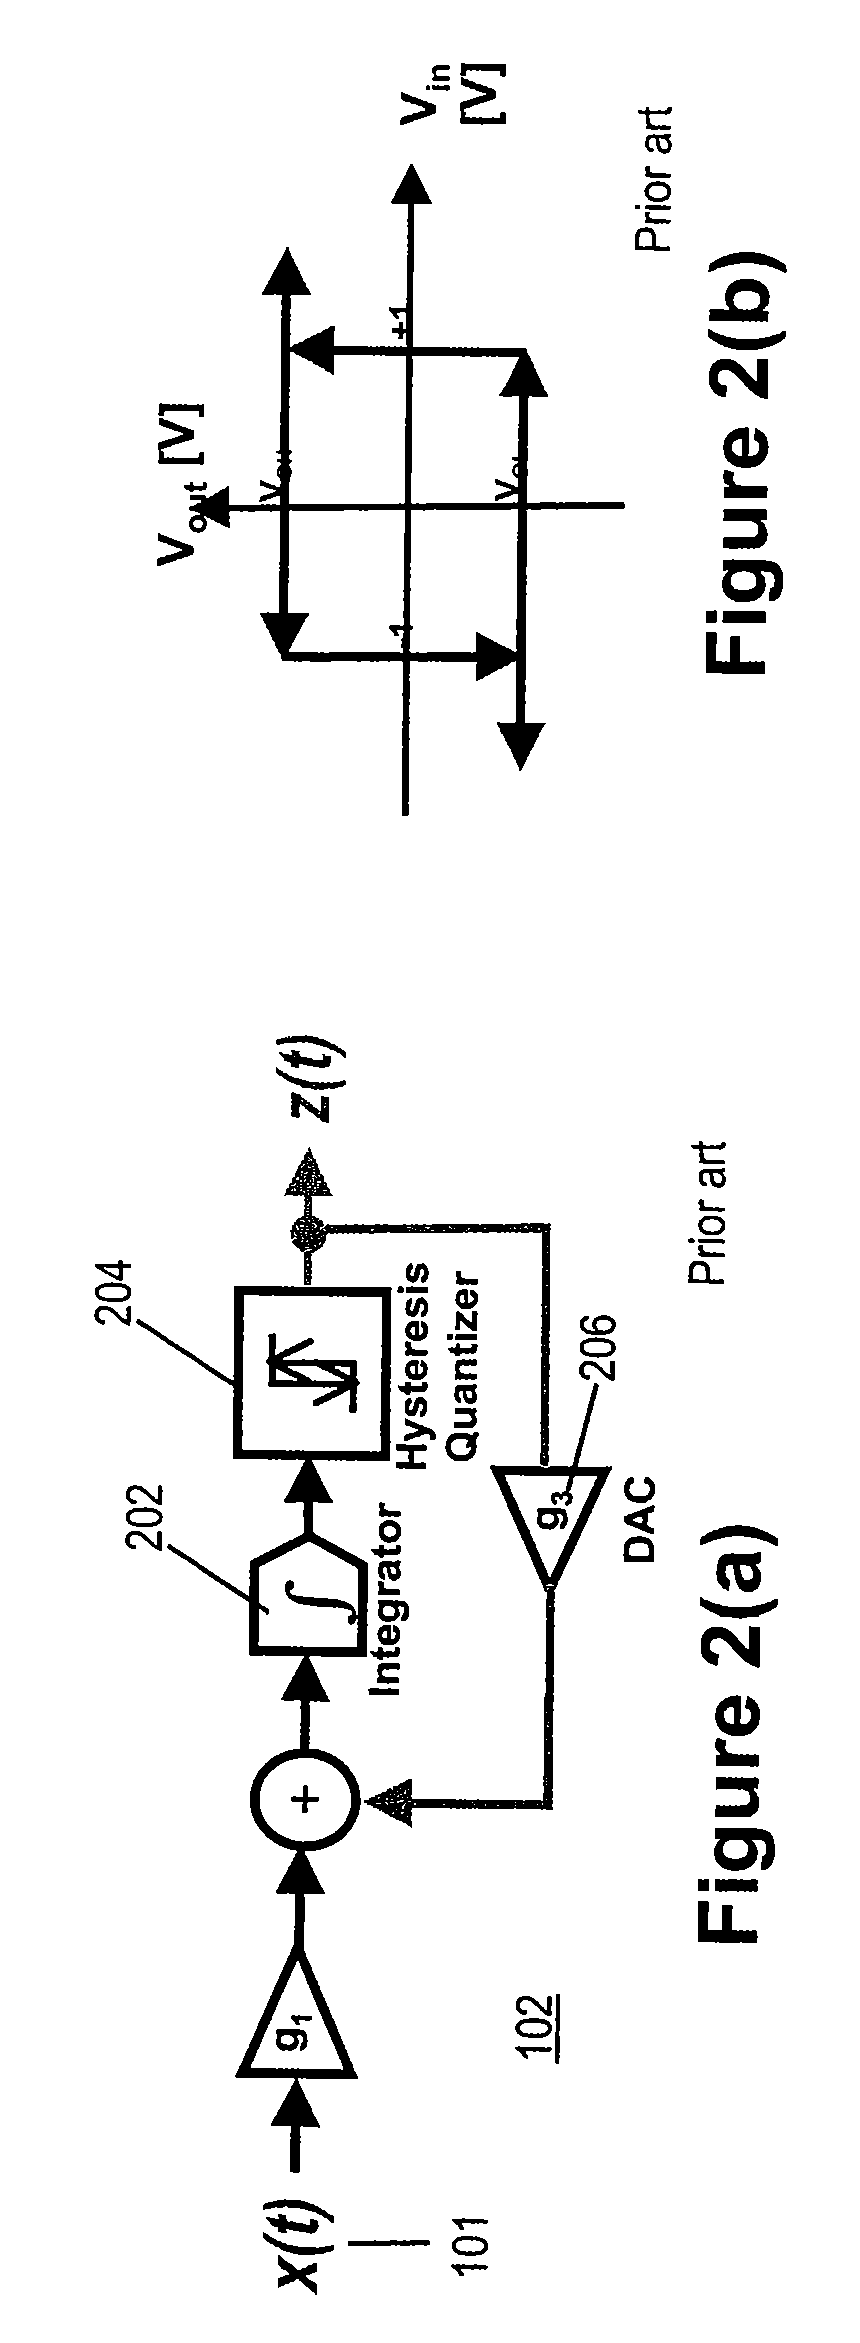 Analog to digital converter using asynchronous pulse technology